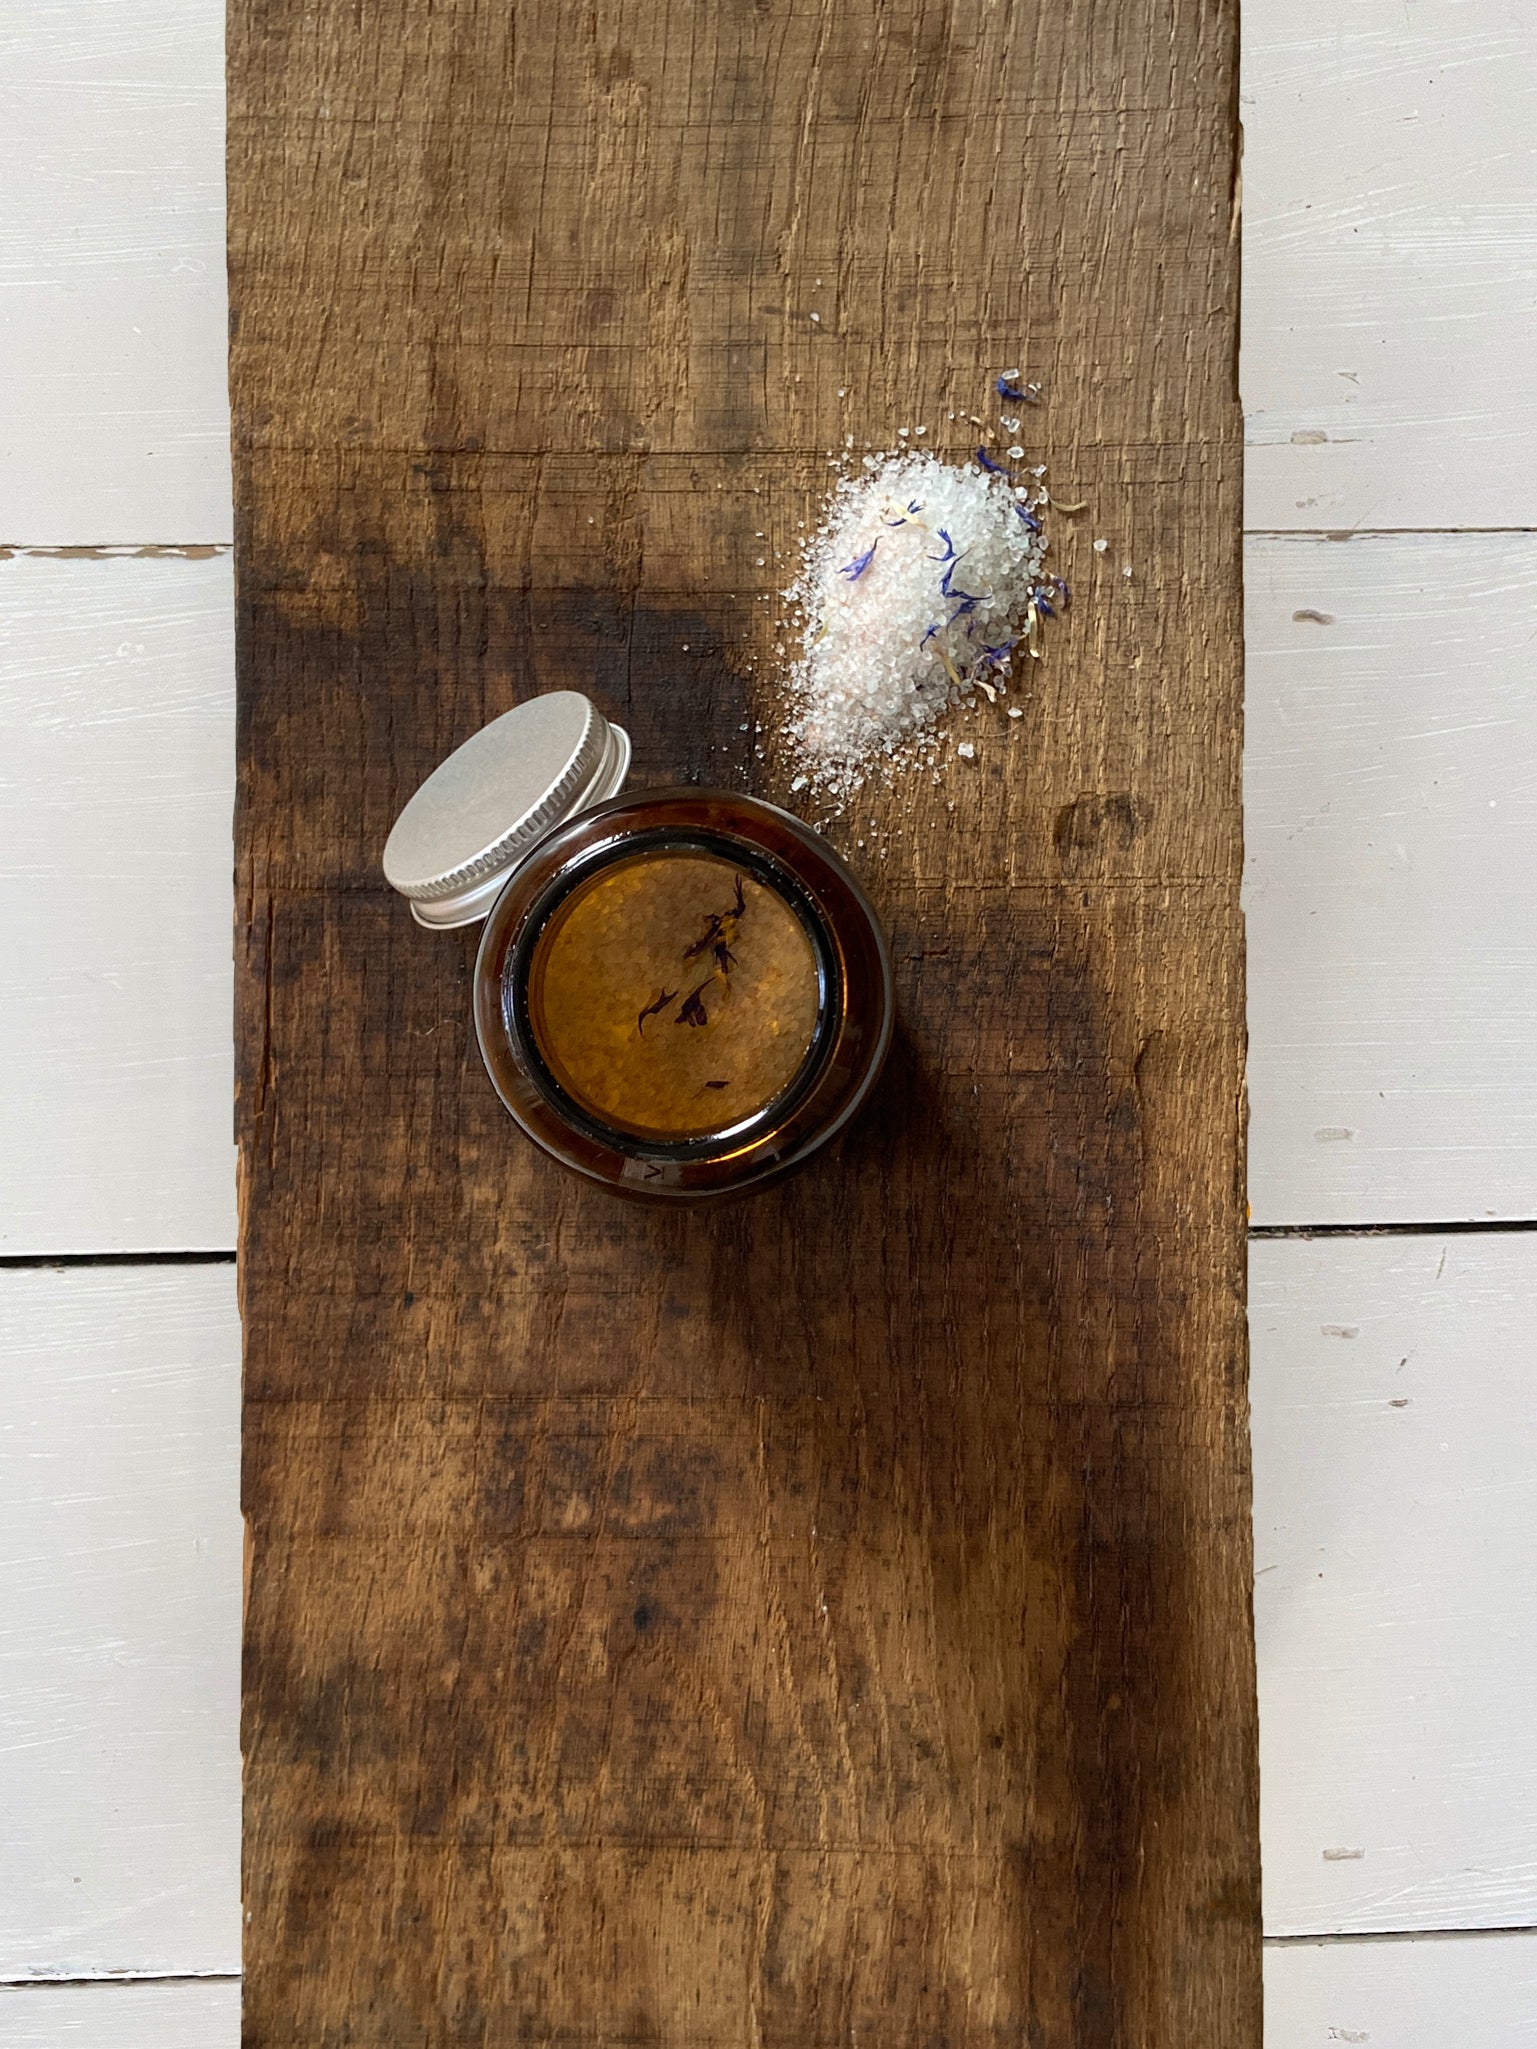 Naturally scented bath salts in an amber glass jar made in East London & Brighton by Bouclé